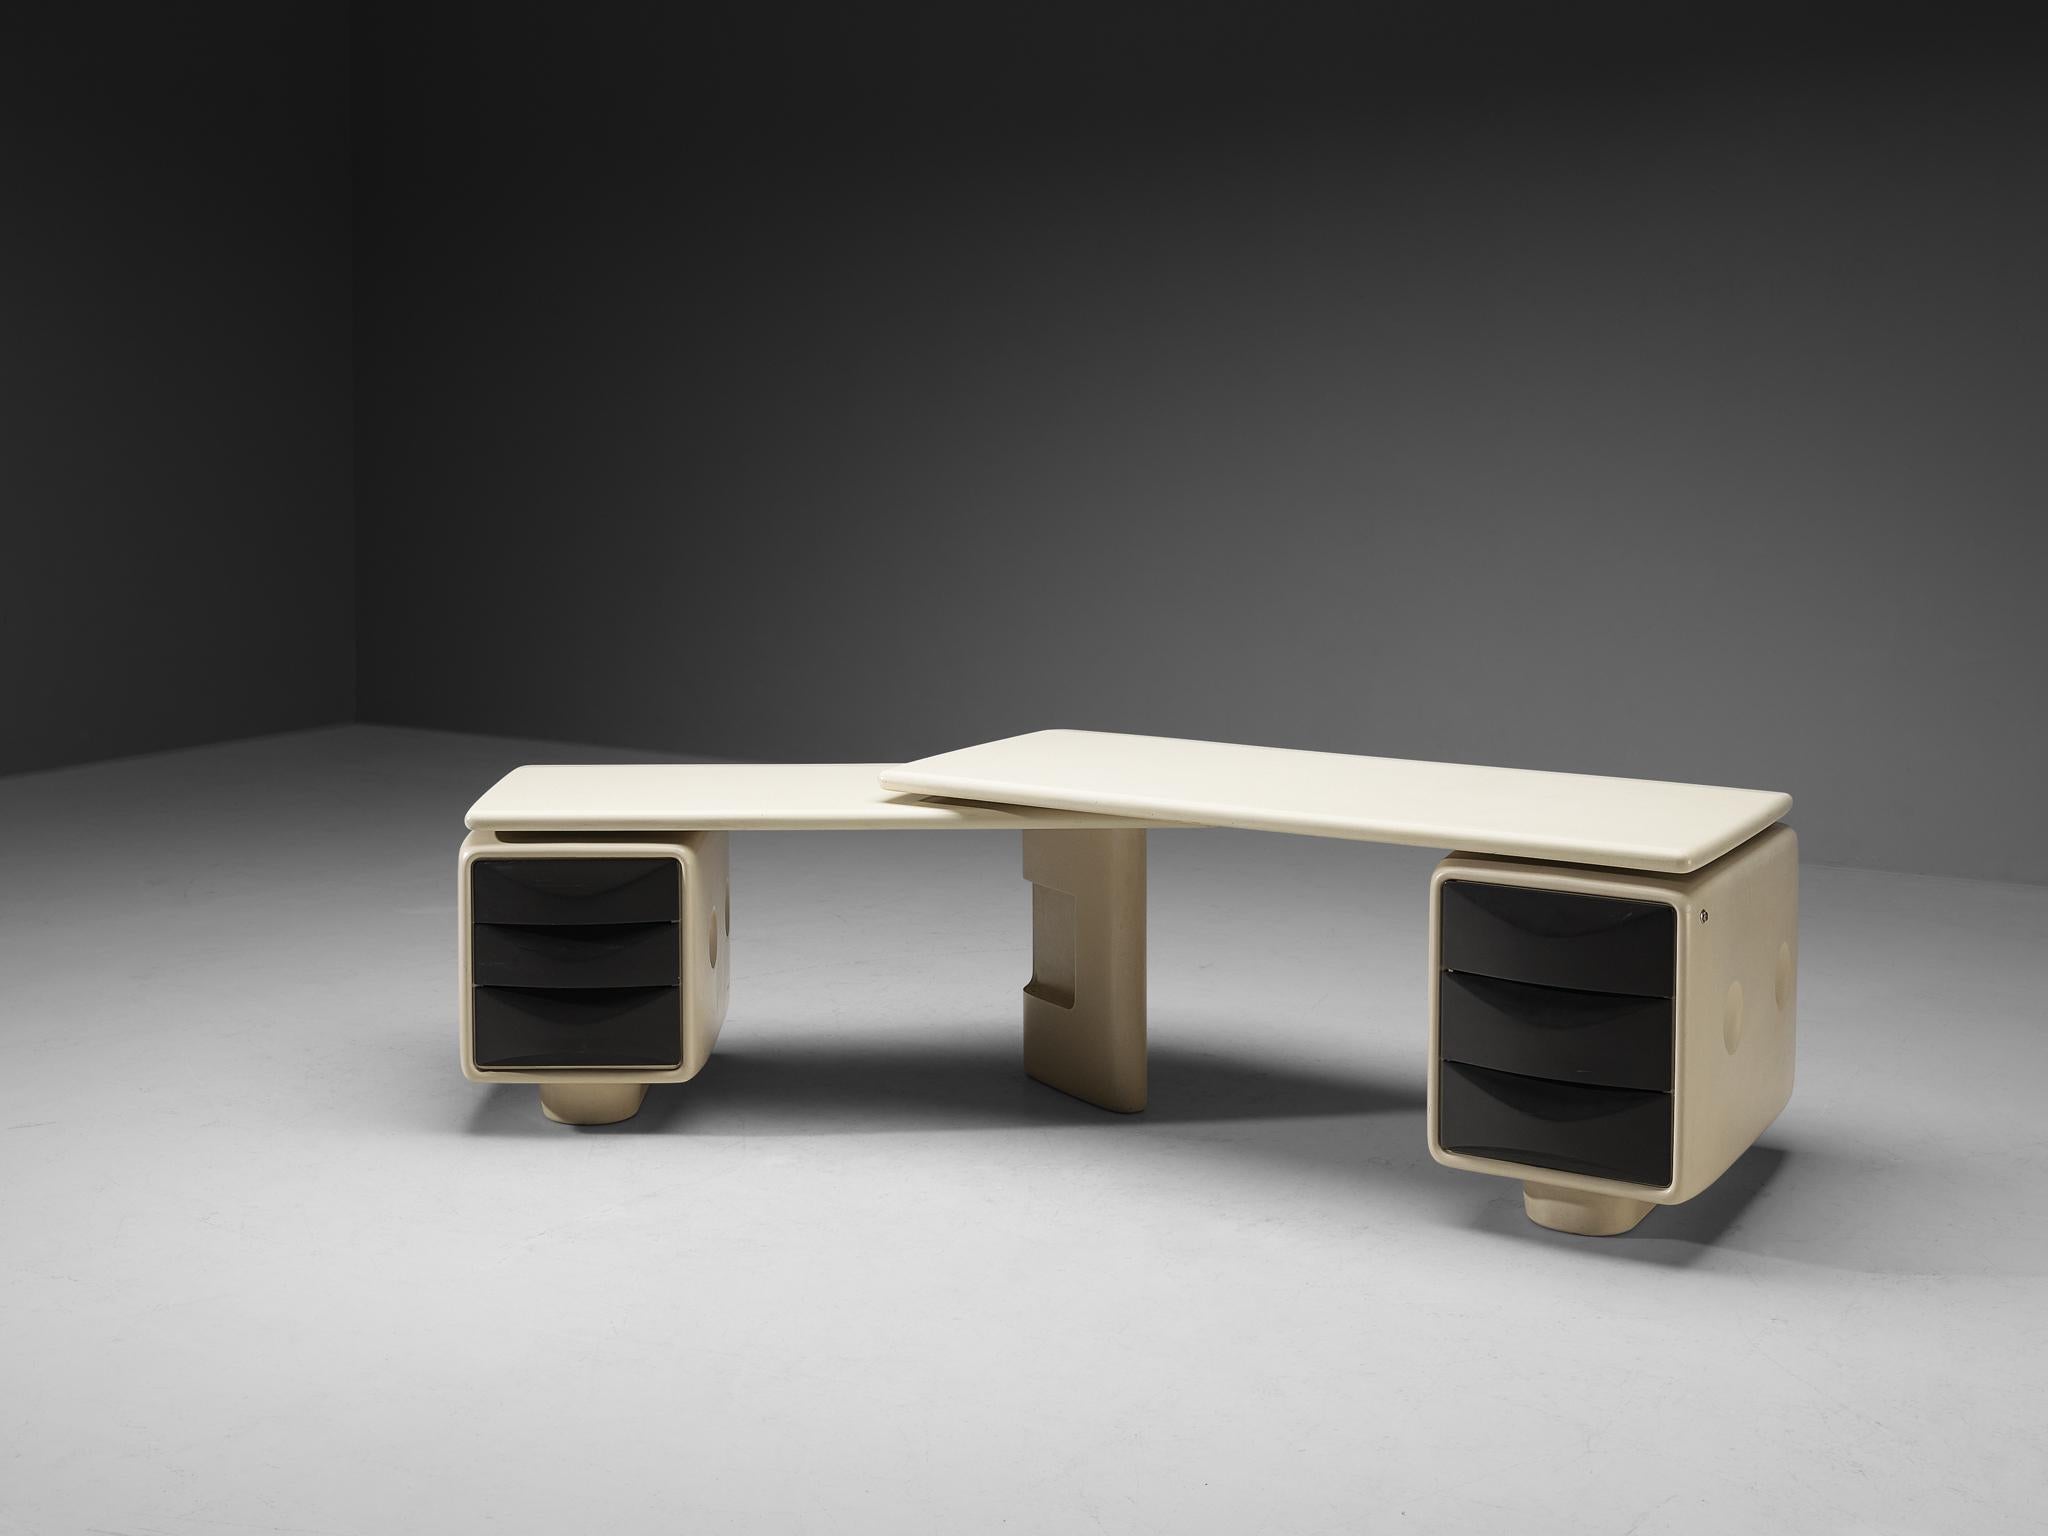 Ernest 'Igl' Hofmann for Wilhelm Werndl, corner desk, model 'Jet, fiberglass, Germany, designed in 1970 

This design truly resembles the ethos of the seventies – a bright and bold era – featuring the commonly used material of that time named